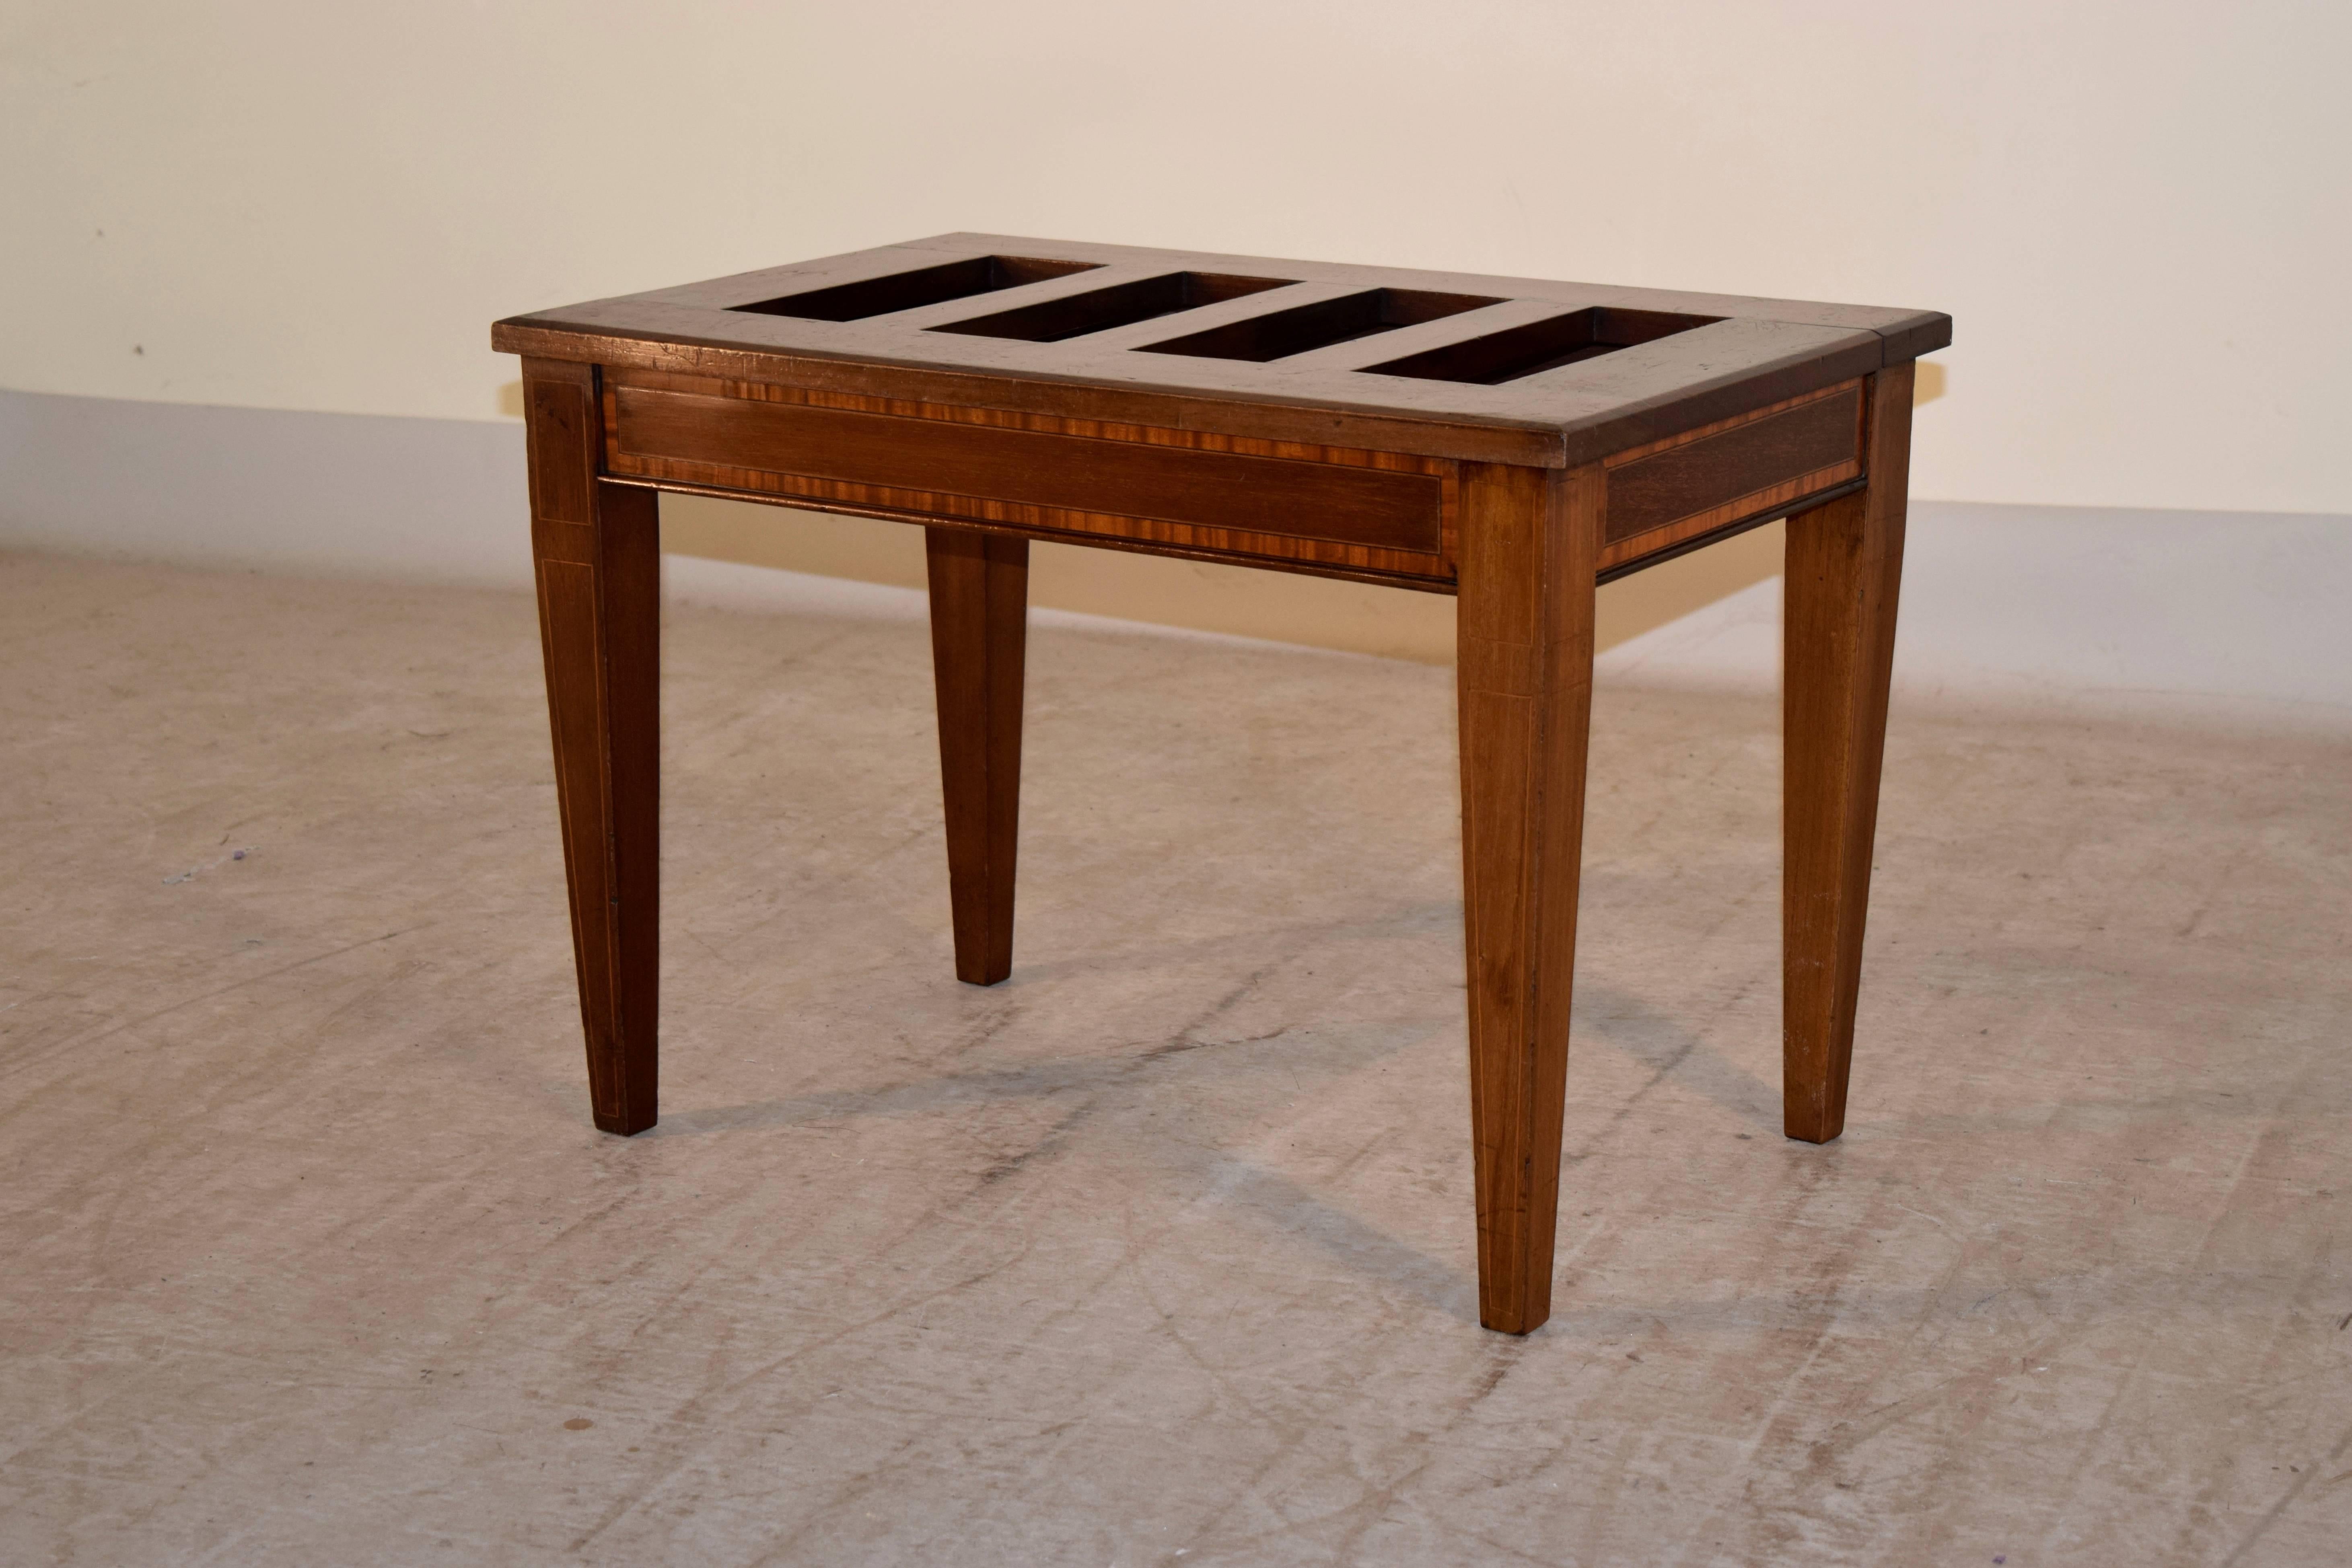 Late 19th century mahogany luggage stand from England. It has a slatted top, following down to a simple apron with satinwood banding and tapered legs.